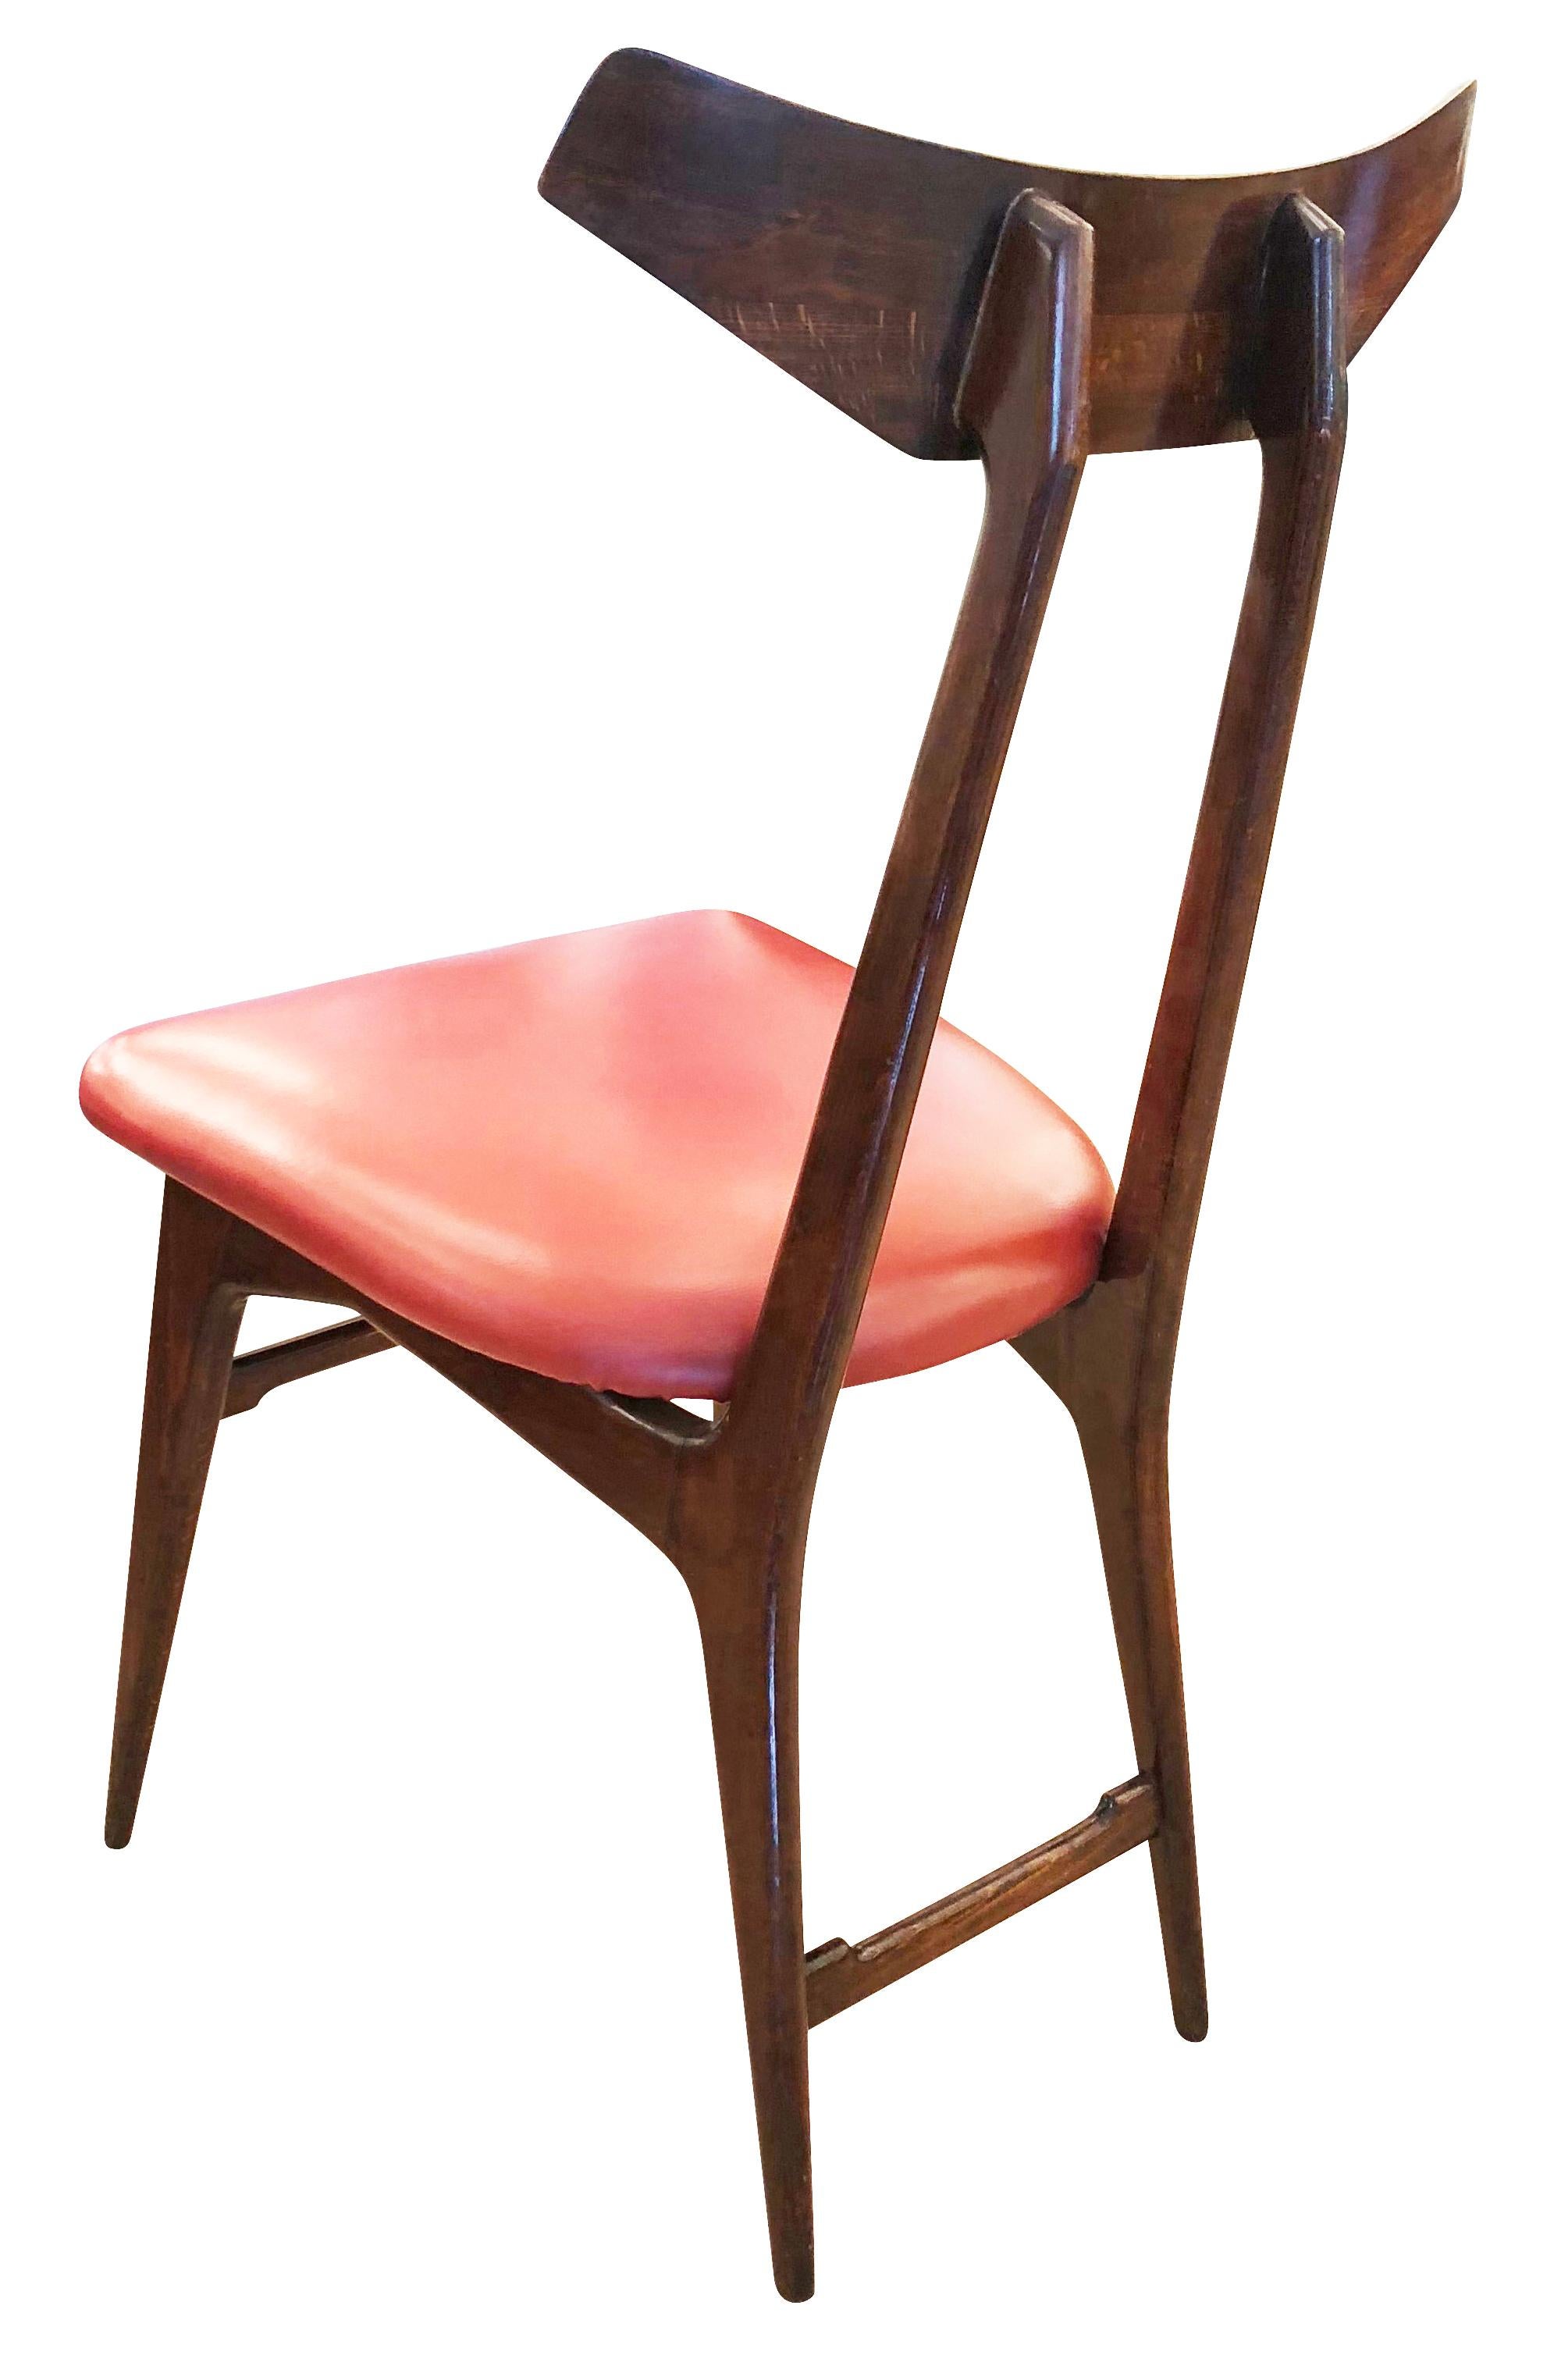 Italian Set of Four Chairs in the Manner of Ico Parisi